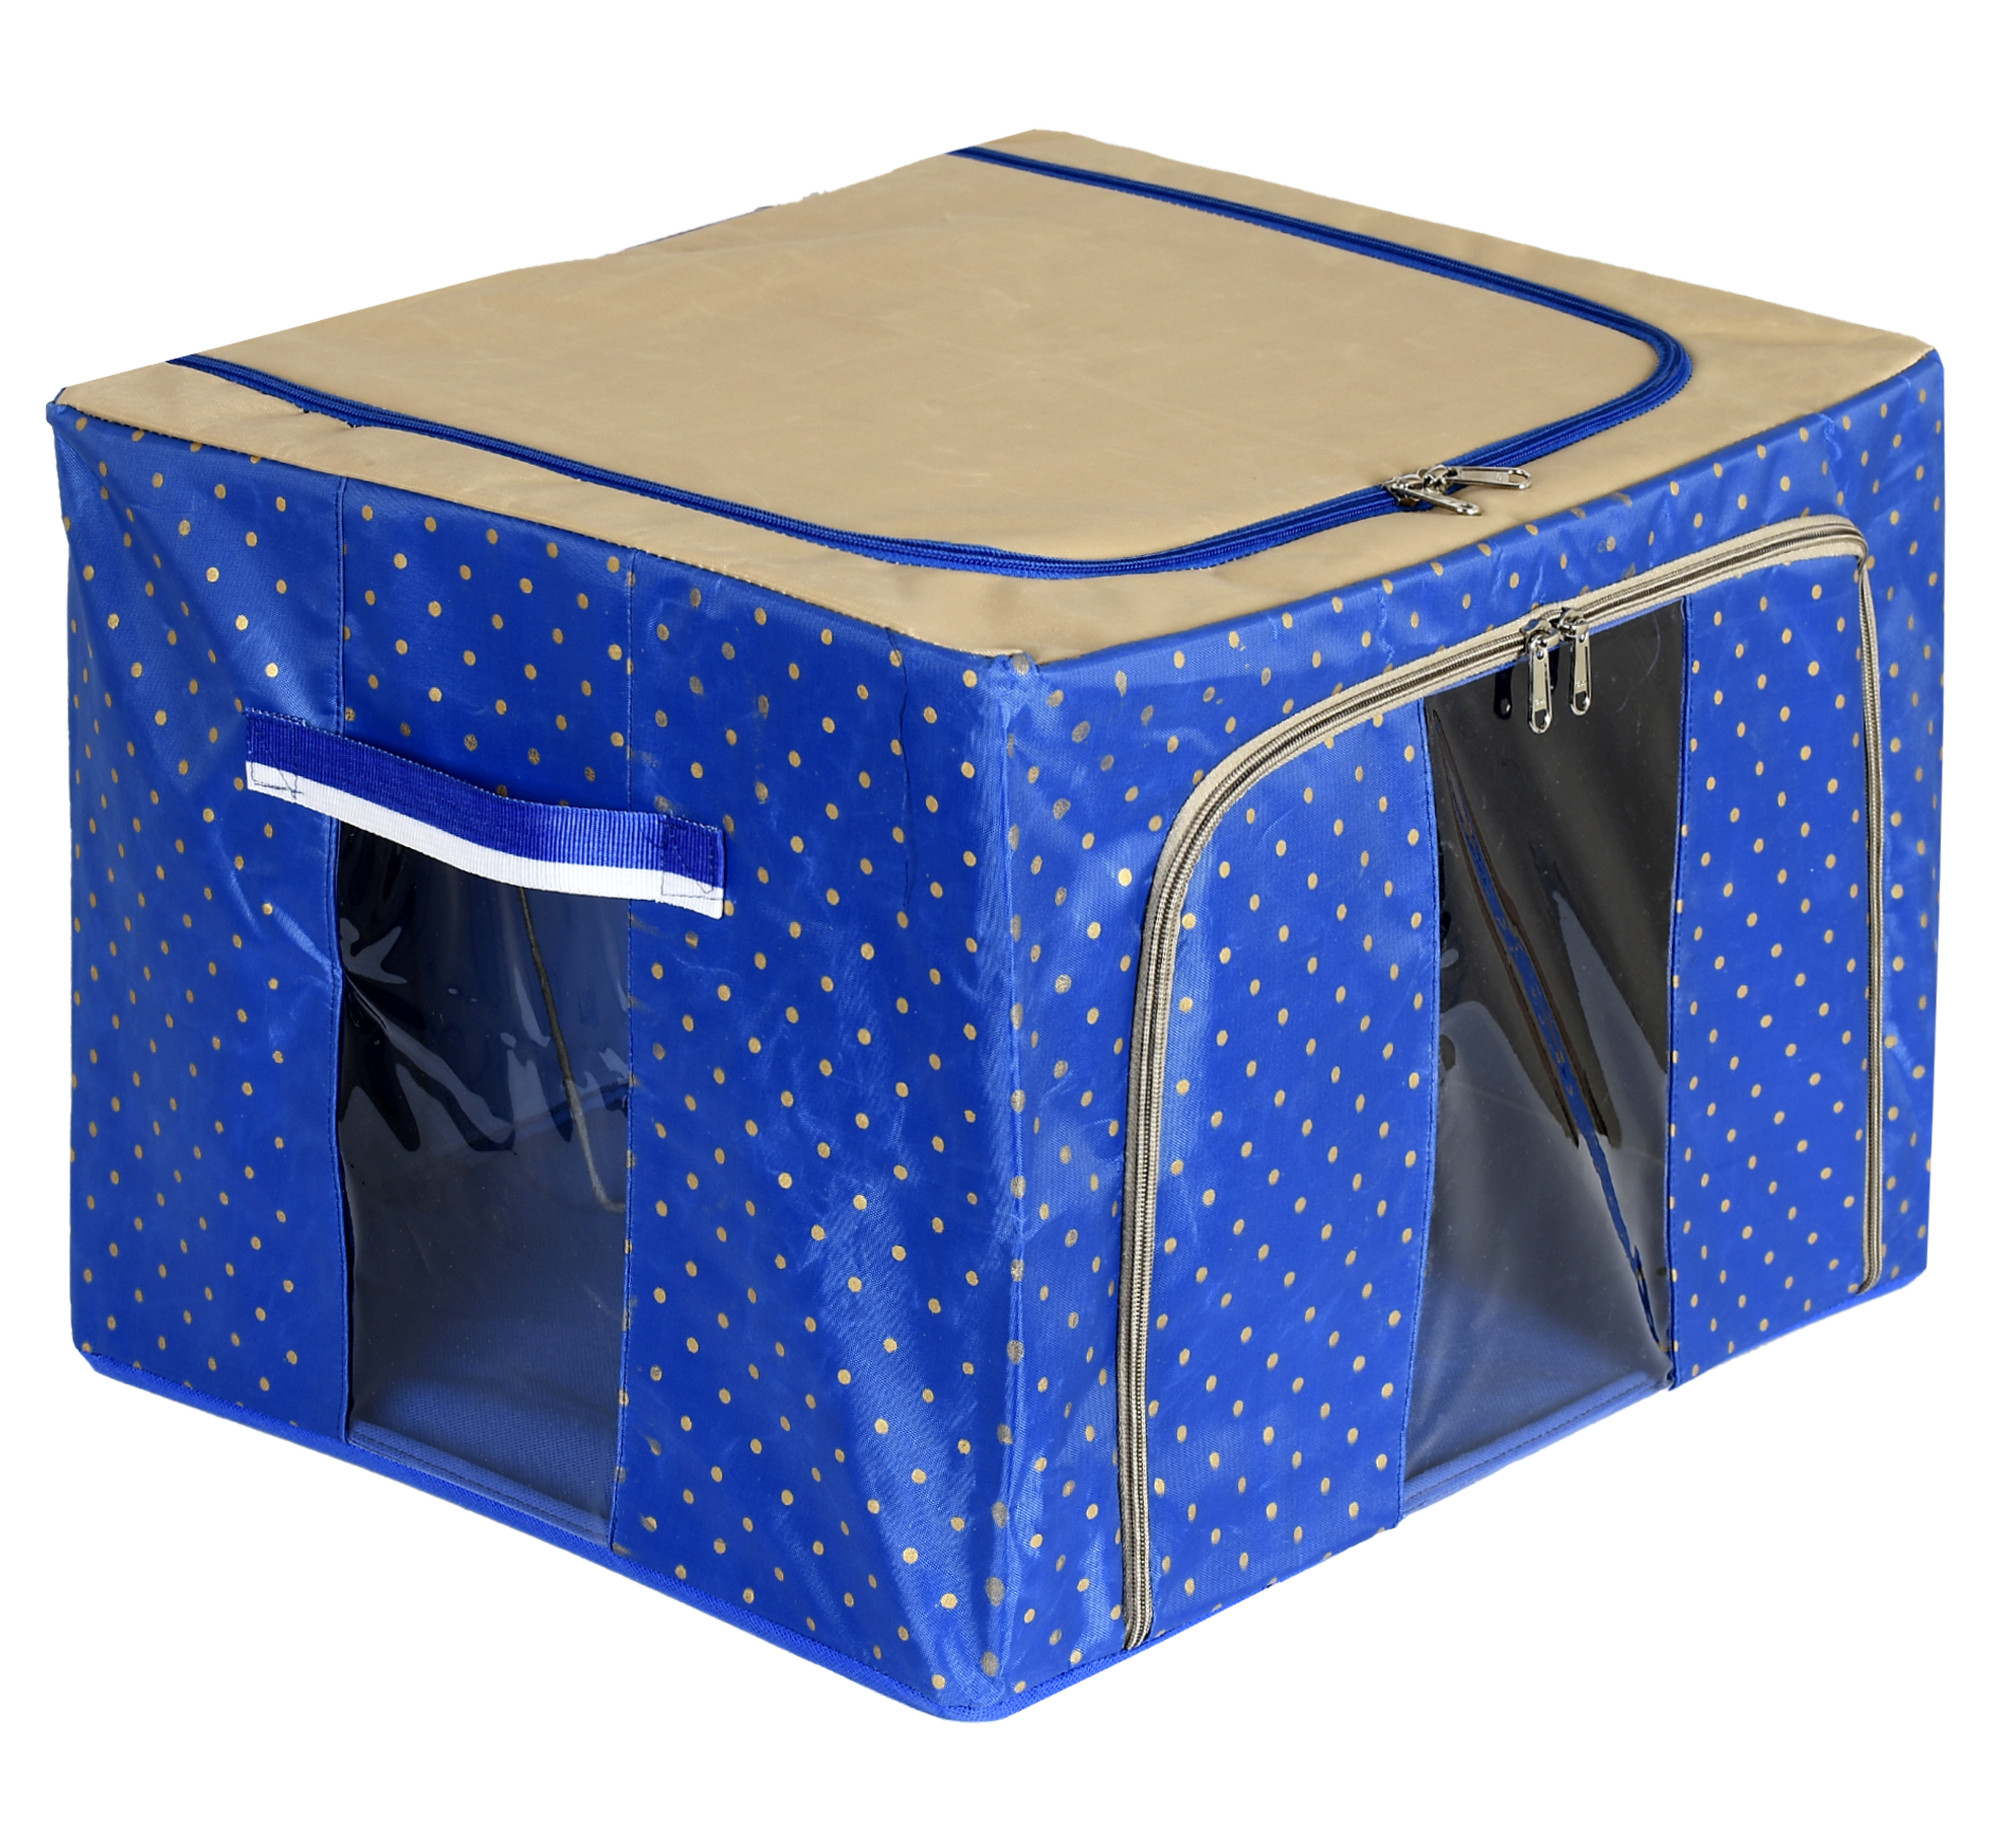 Kuber Industries Dot Printed Steel Frame Storage Box/Organizer For Clothing, Blankets, Bedding With Clear Window, 88Ltr. (Blue & Brown)-44KM0265